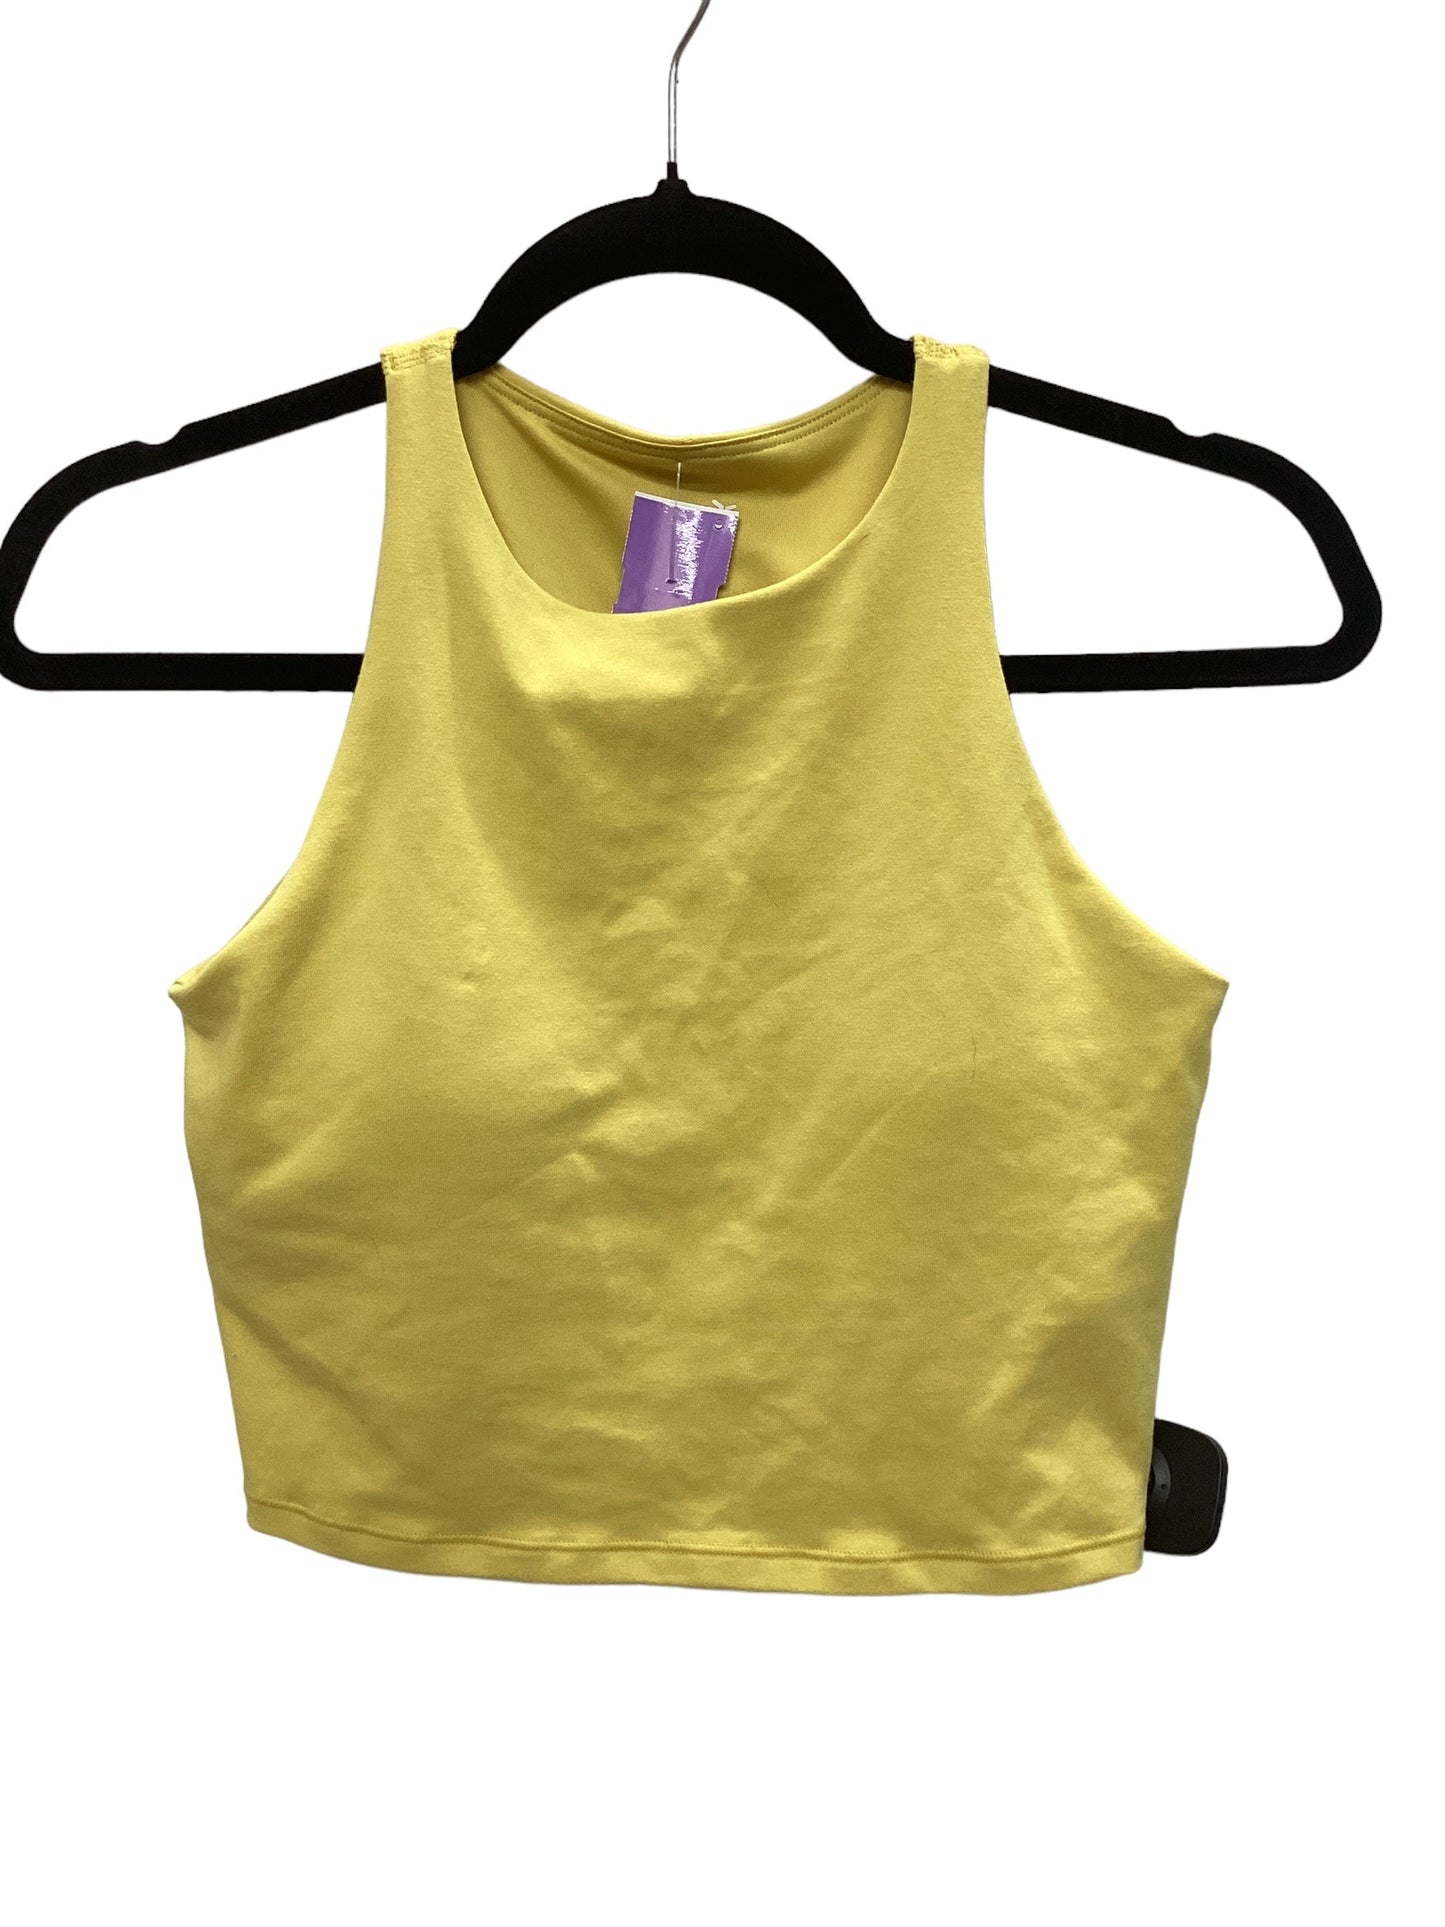 Yellow Athletic Bra Old Navy, Size S